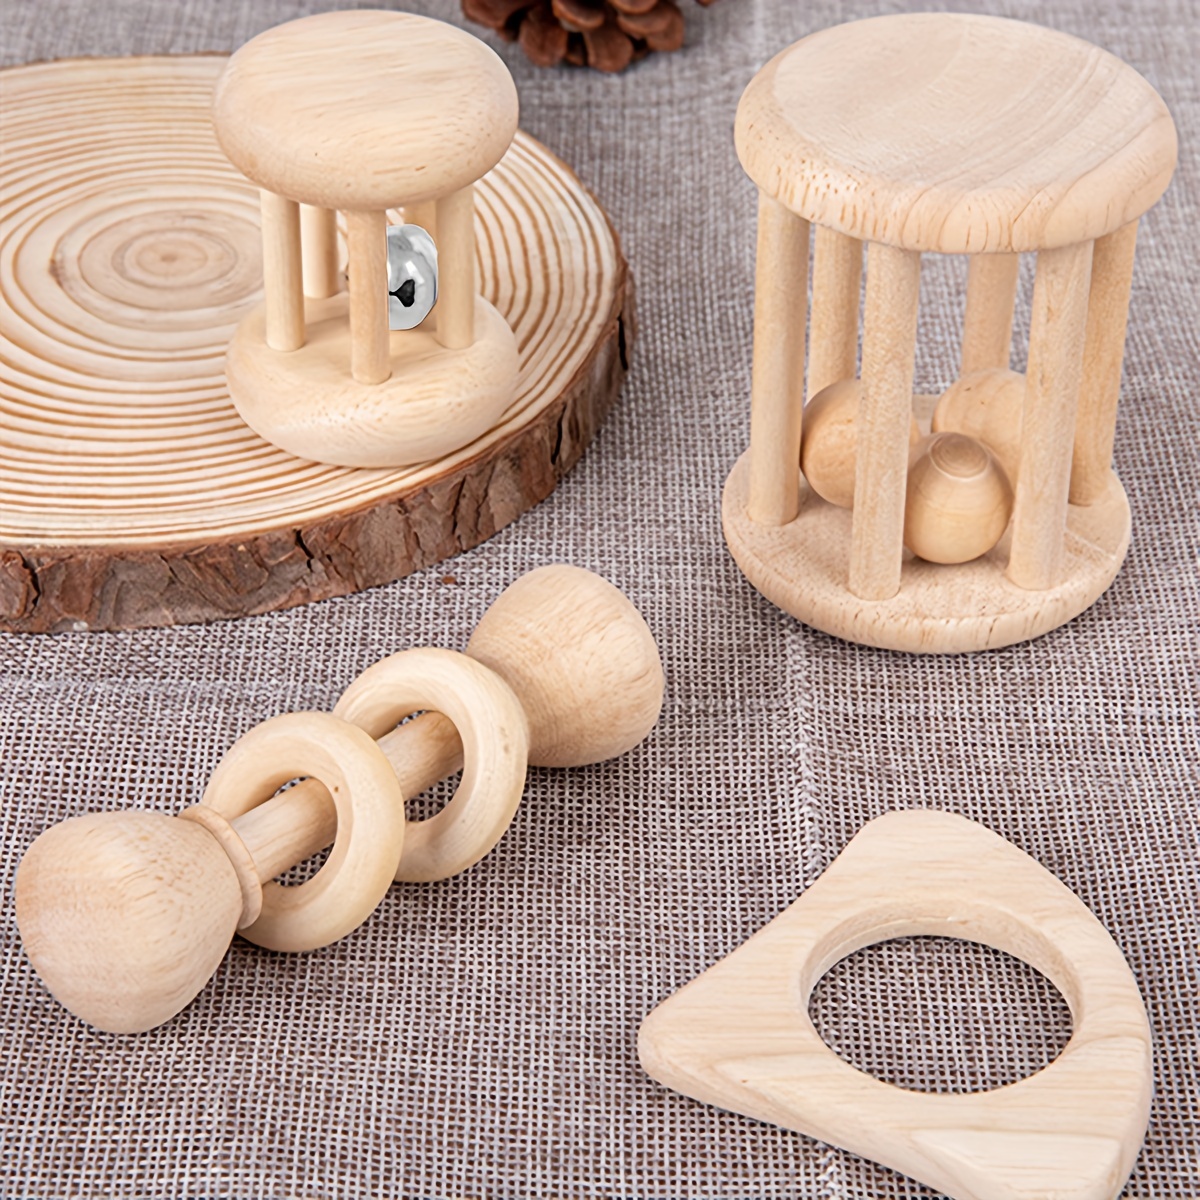 WODI 4 Piece Wooden Baby Rattle Toy Montessori Teething Ring Log Geometric  Grab Toy Set Natural Wood Rattle Set for Infants and Toddlers